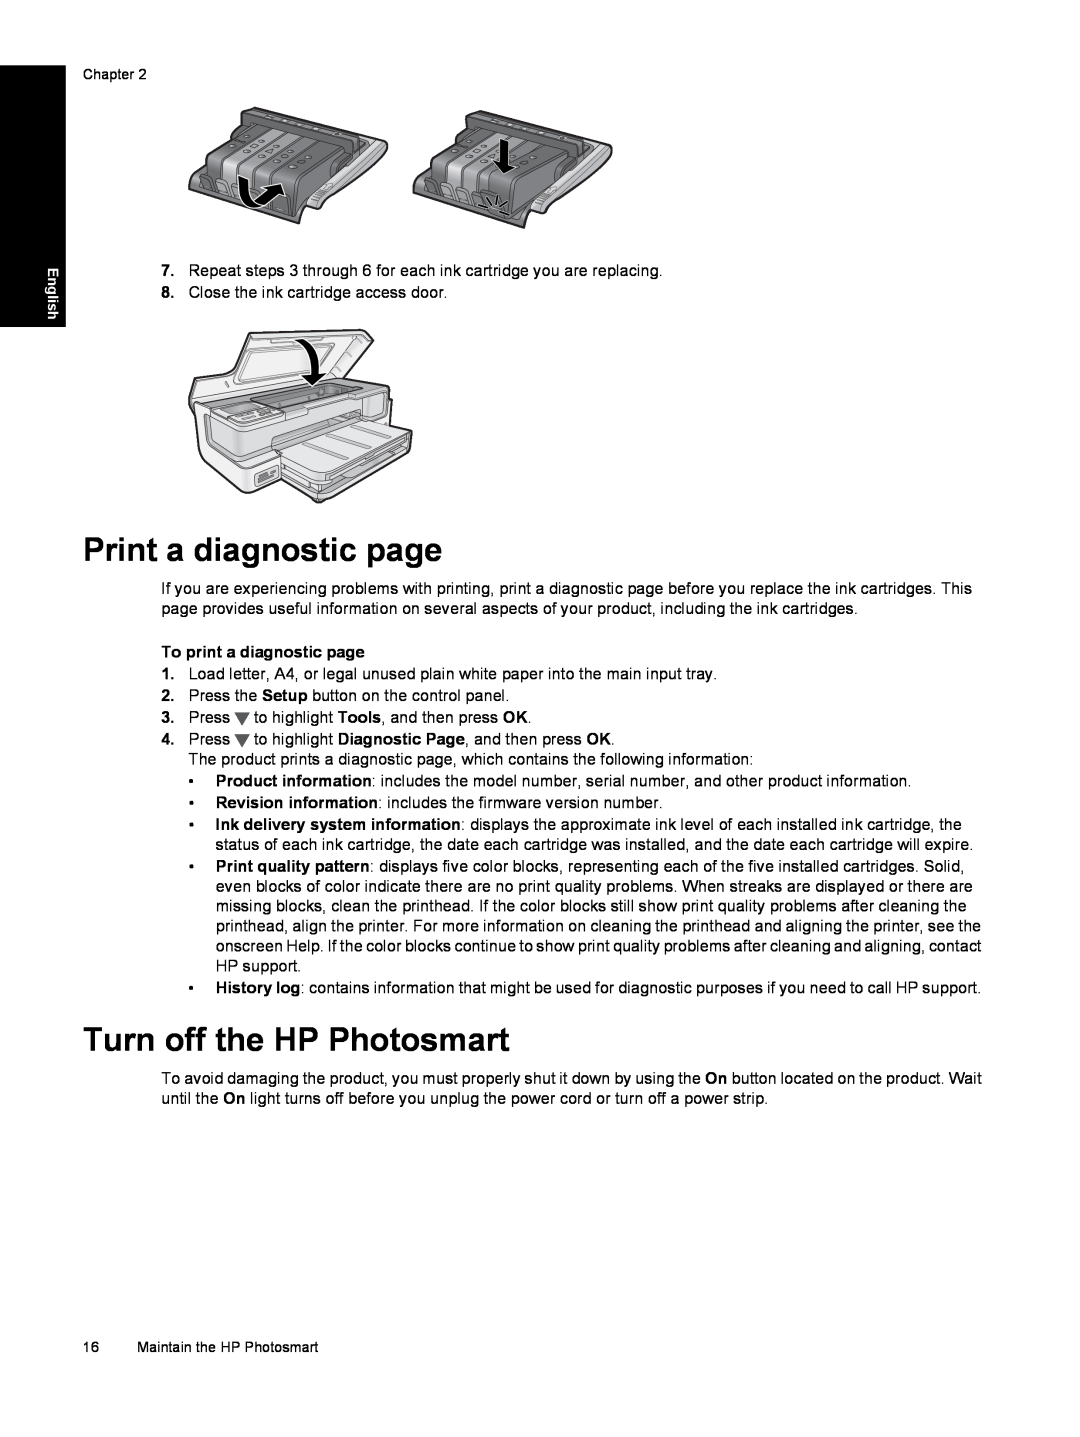 HP B8550 Photo CB981A#B1H manual Print a diagnostic page, Turn off the HP Photosmart, To print a diagnostic page 